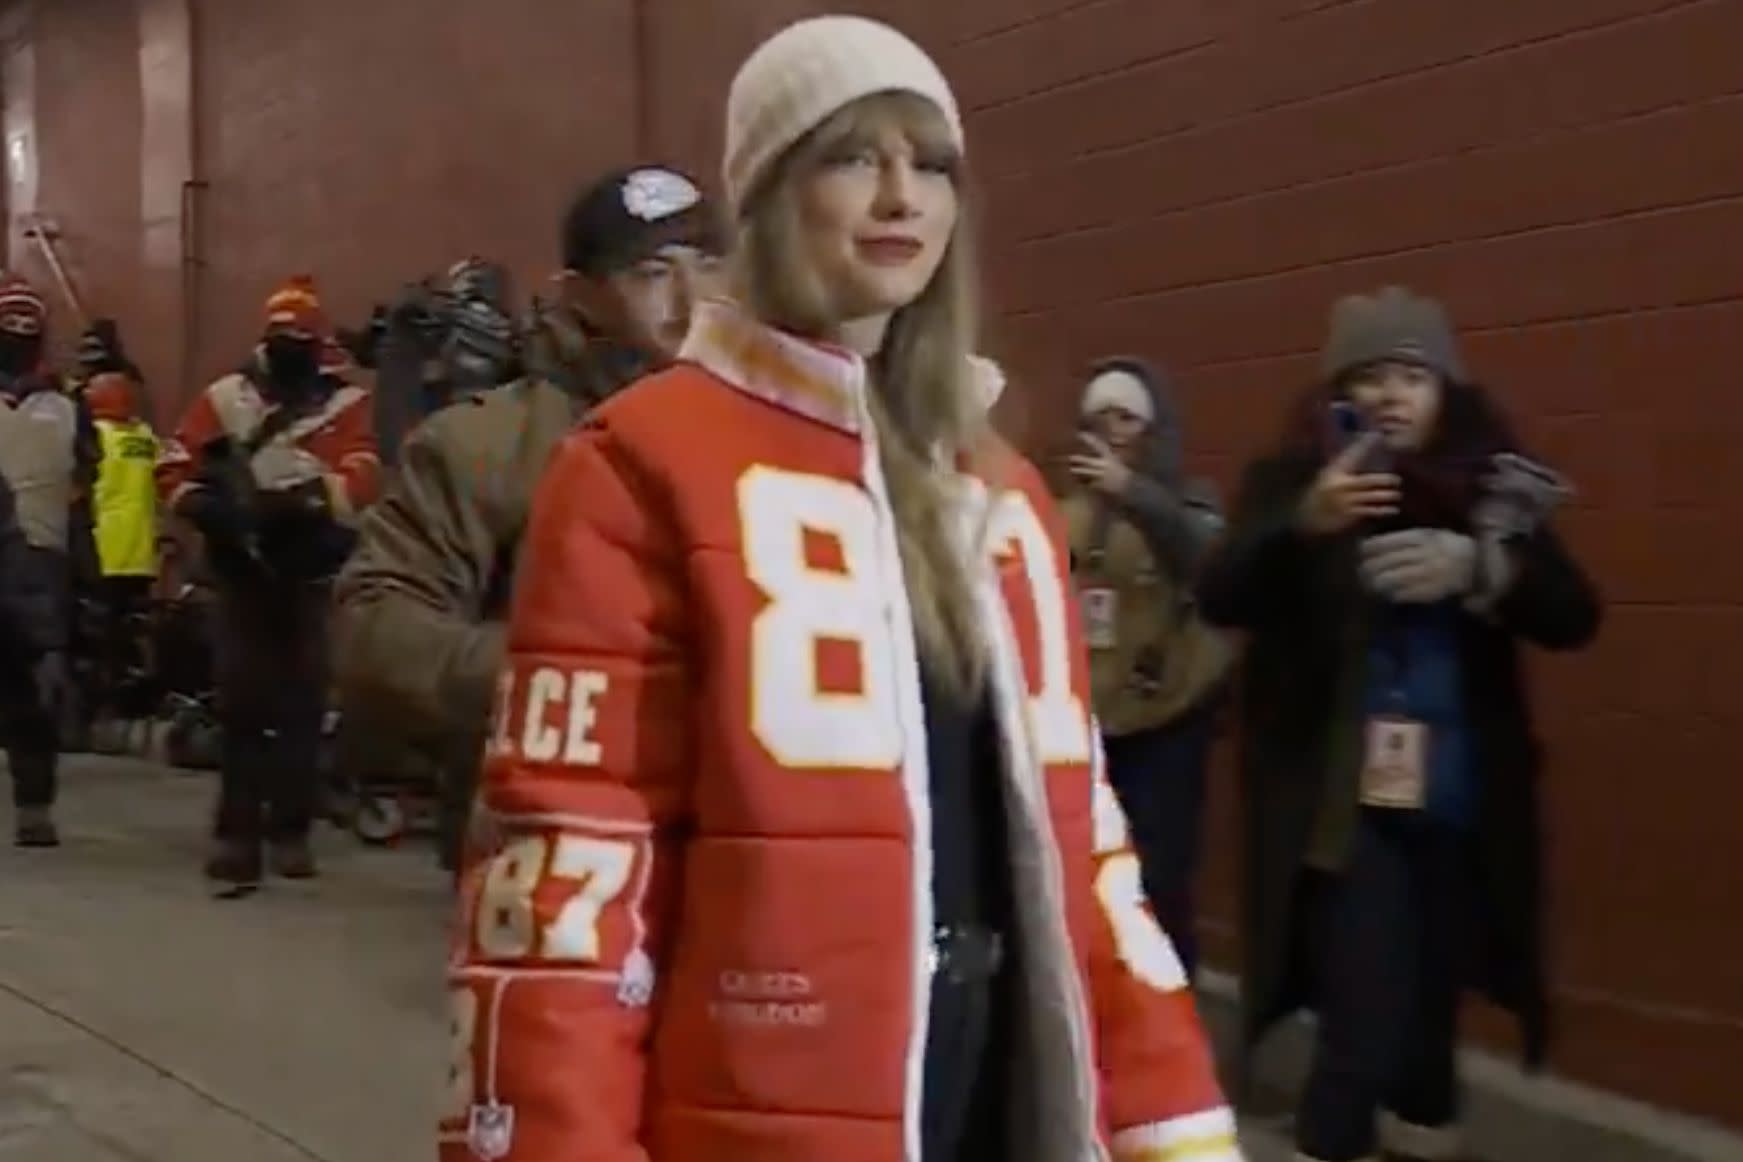 taylor swift and brittany mahomes root for their beaus in matching custom coats at chiefs-dolphins game